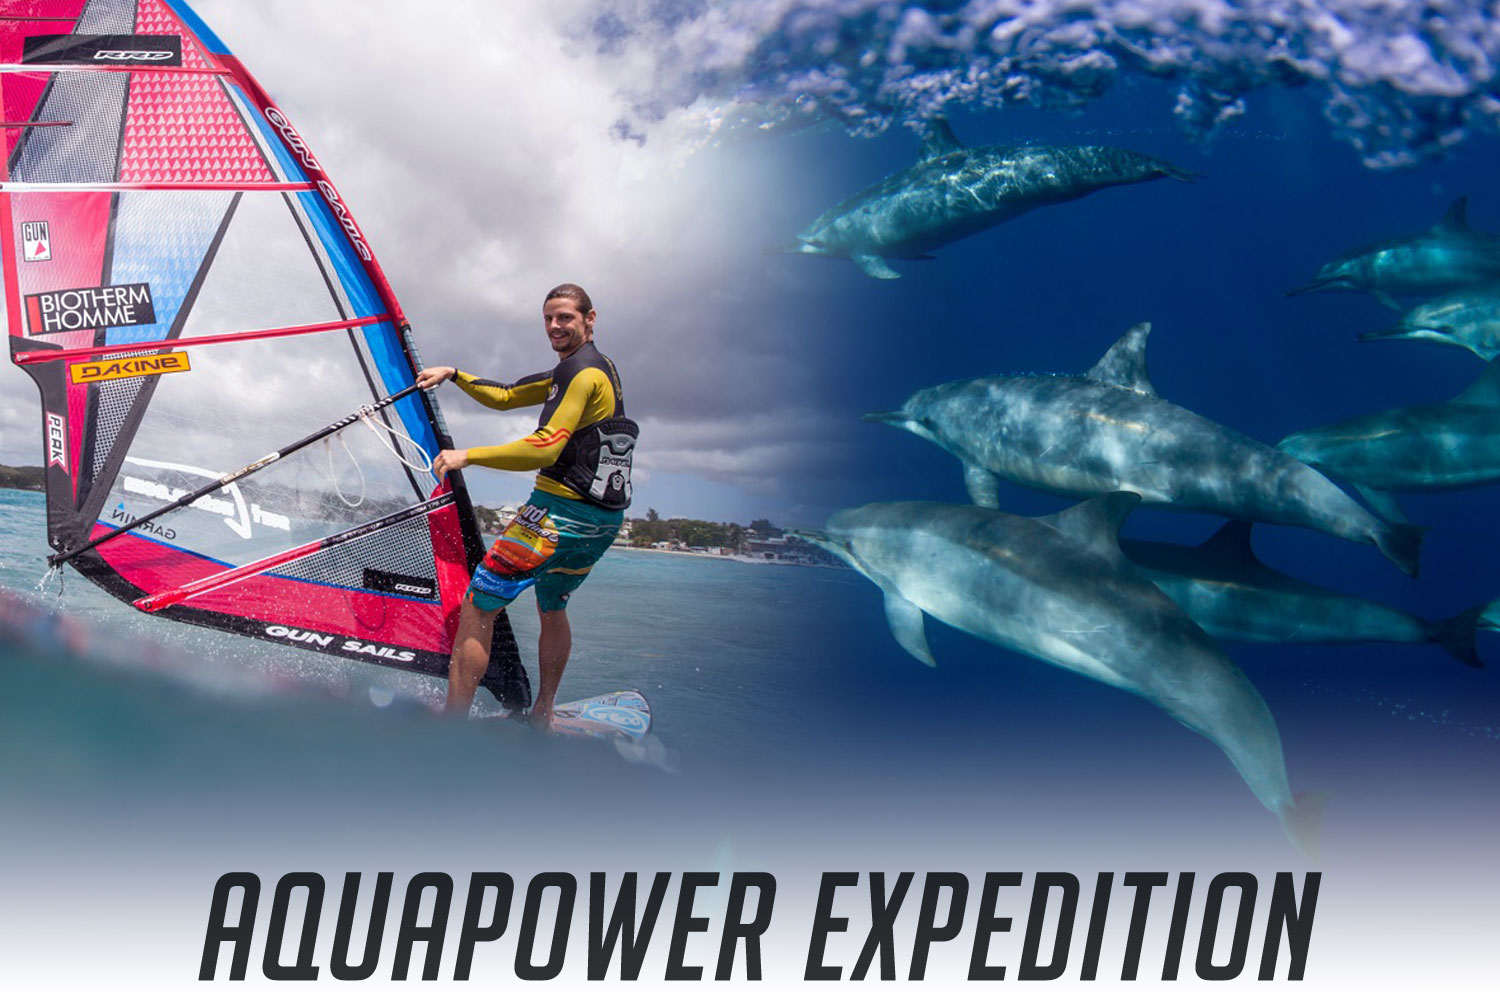 Aquapower Expedition